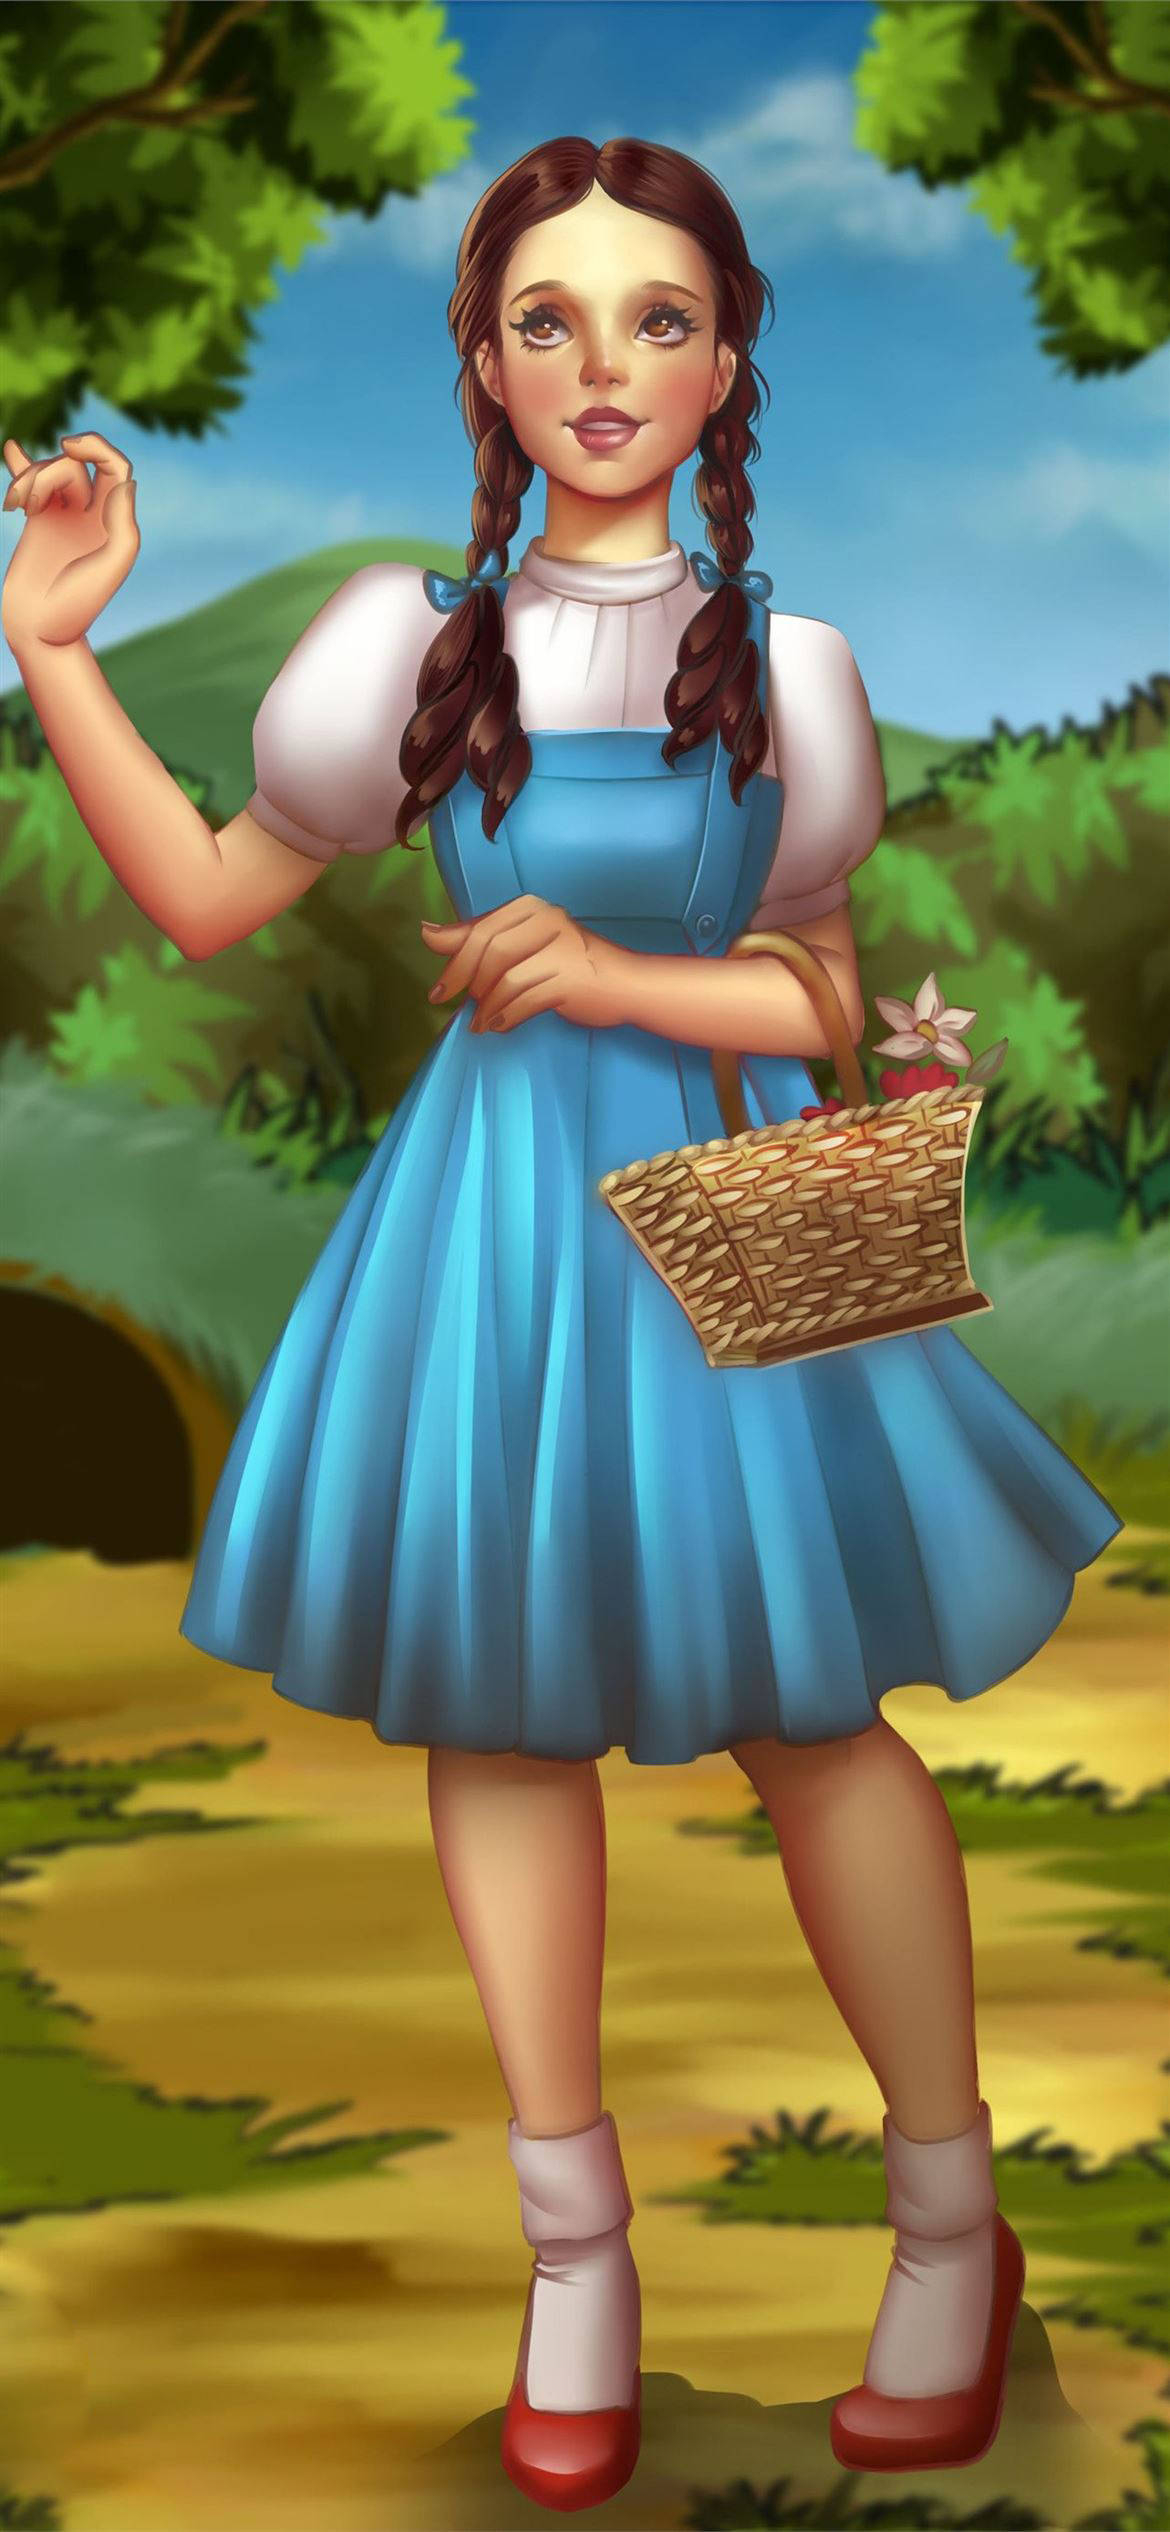 1170x2532 Download The Wizard Of Oz Dorothy Outfit Wallpaper